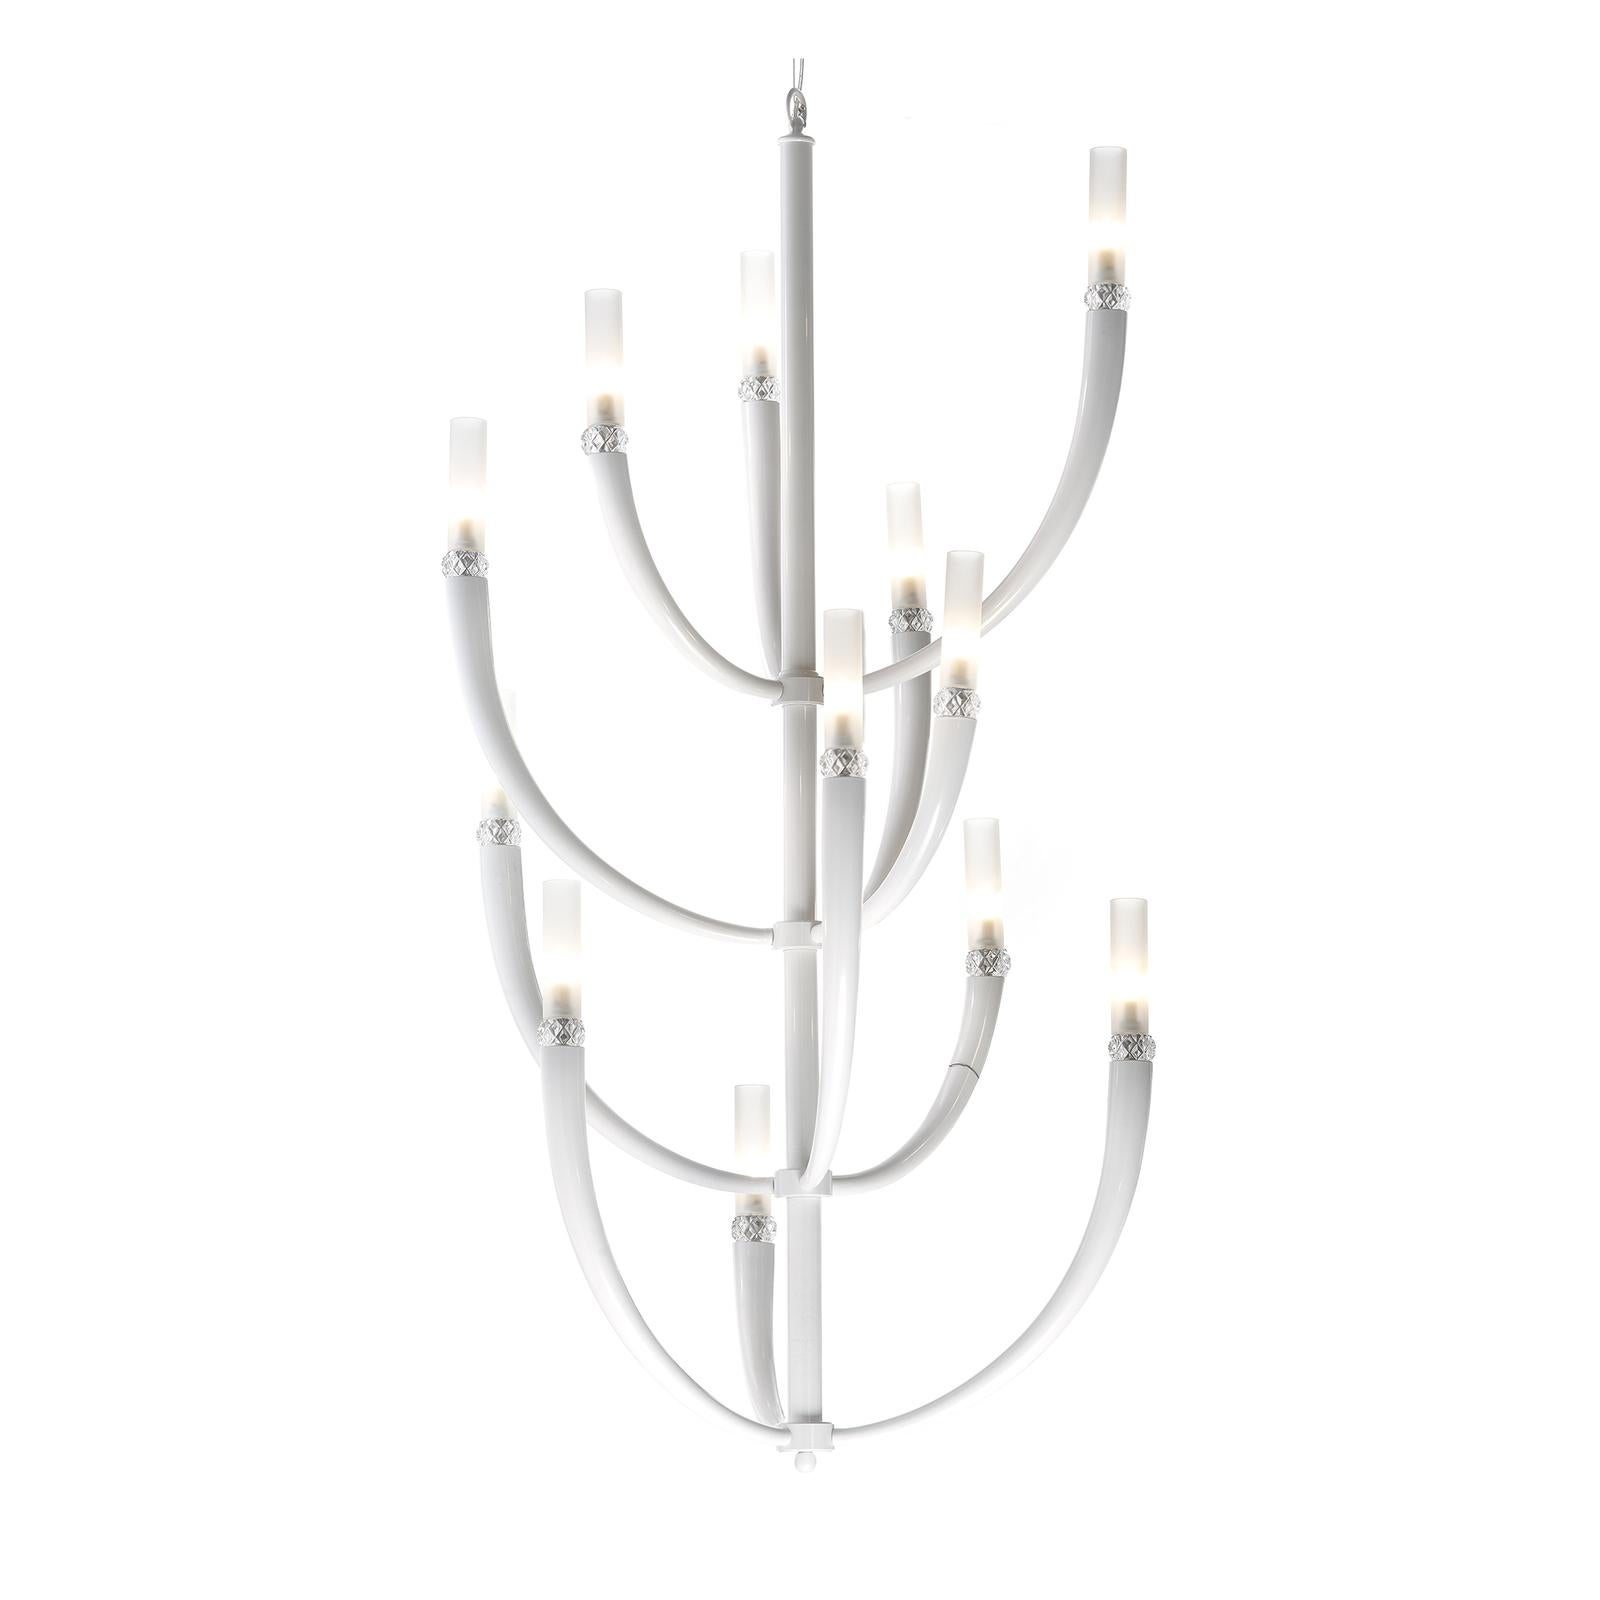 The design of this unique chandelier is inspired by nature and features a series of branch-like elements stemming upward from a central vertical piece that hangs from the ceiling. This stylized interpretation of a tree is both light and dynamic and